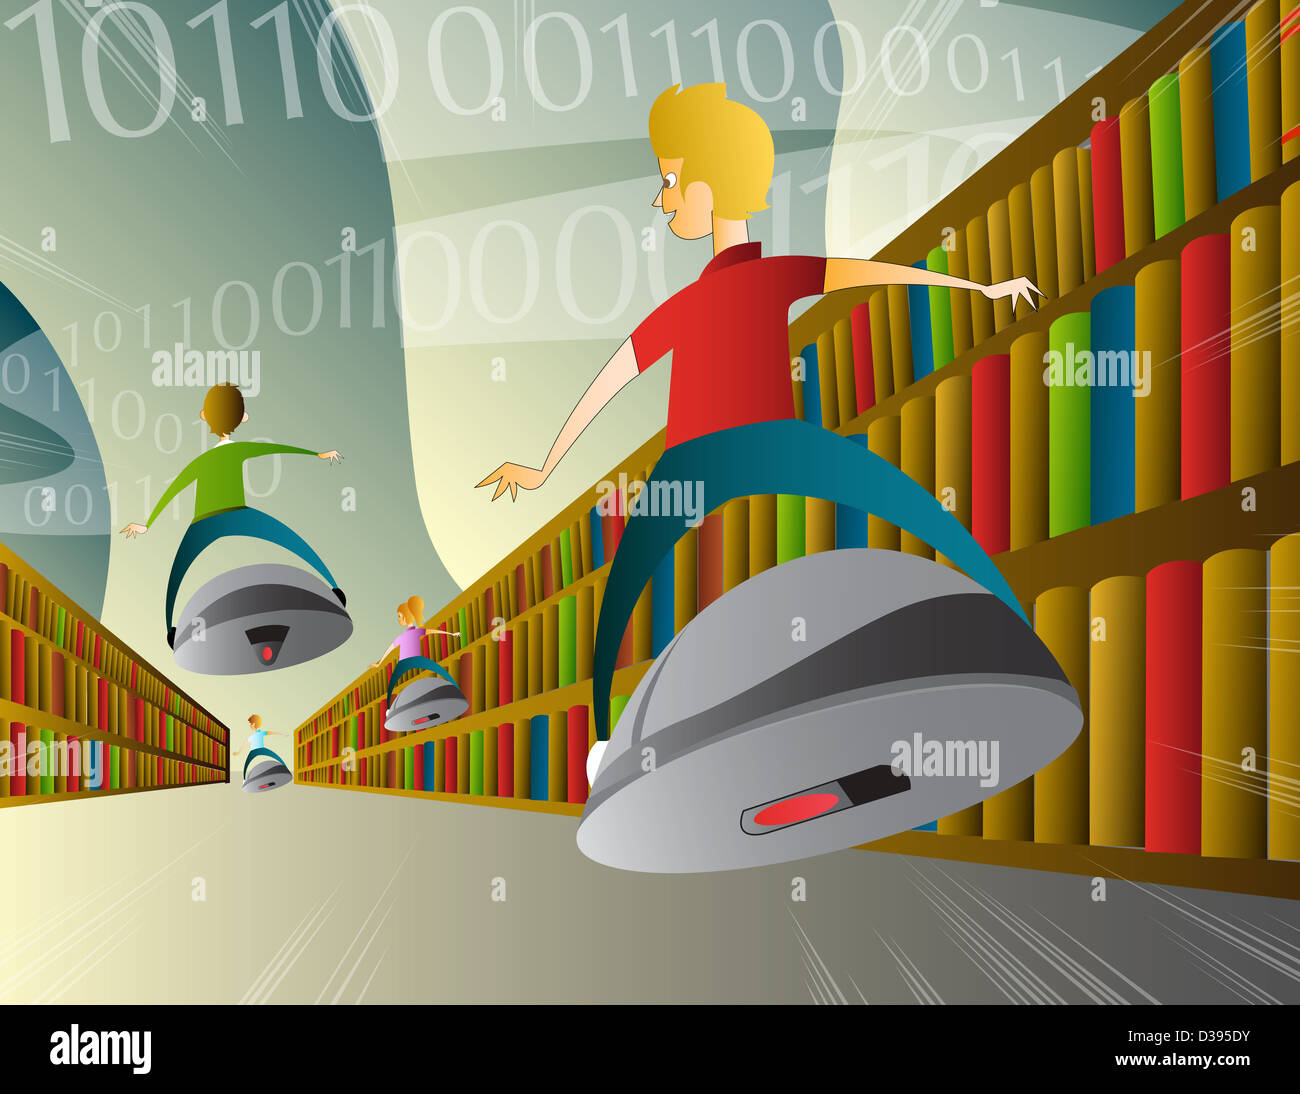 Illustration of high tech online education Stock Photo